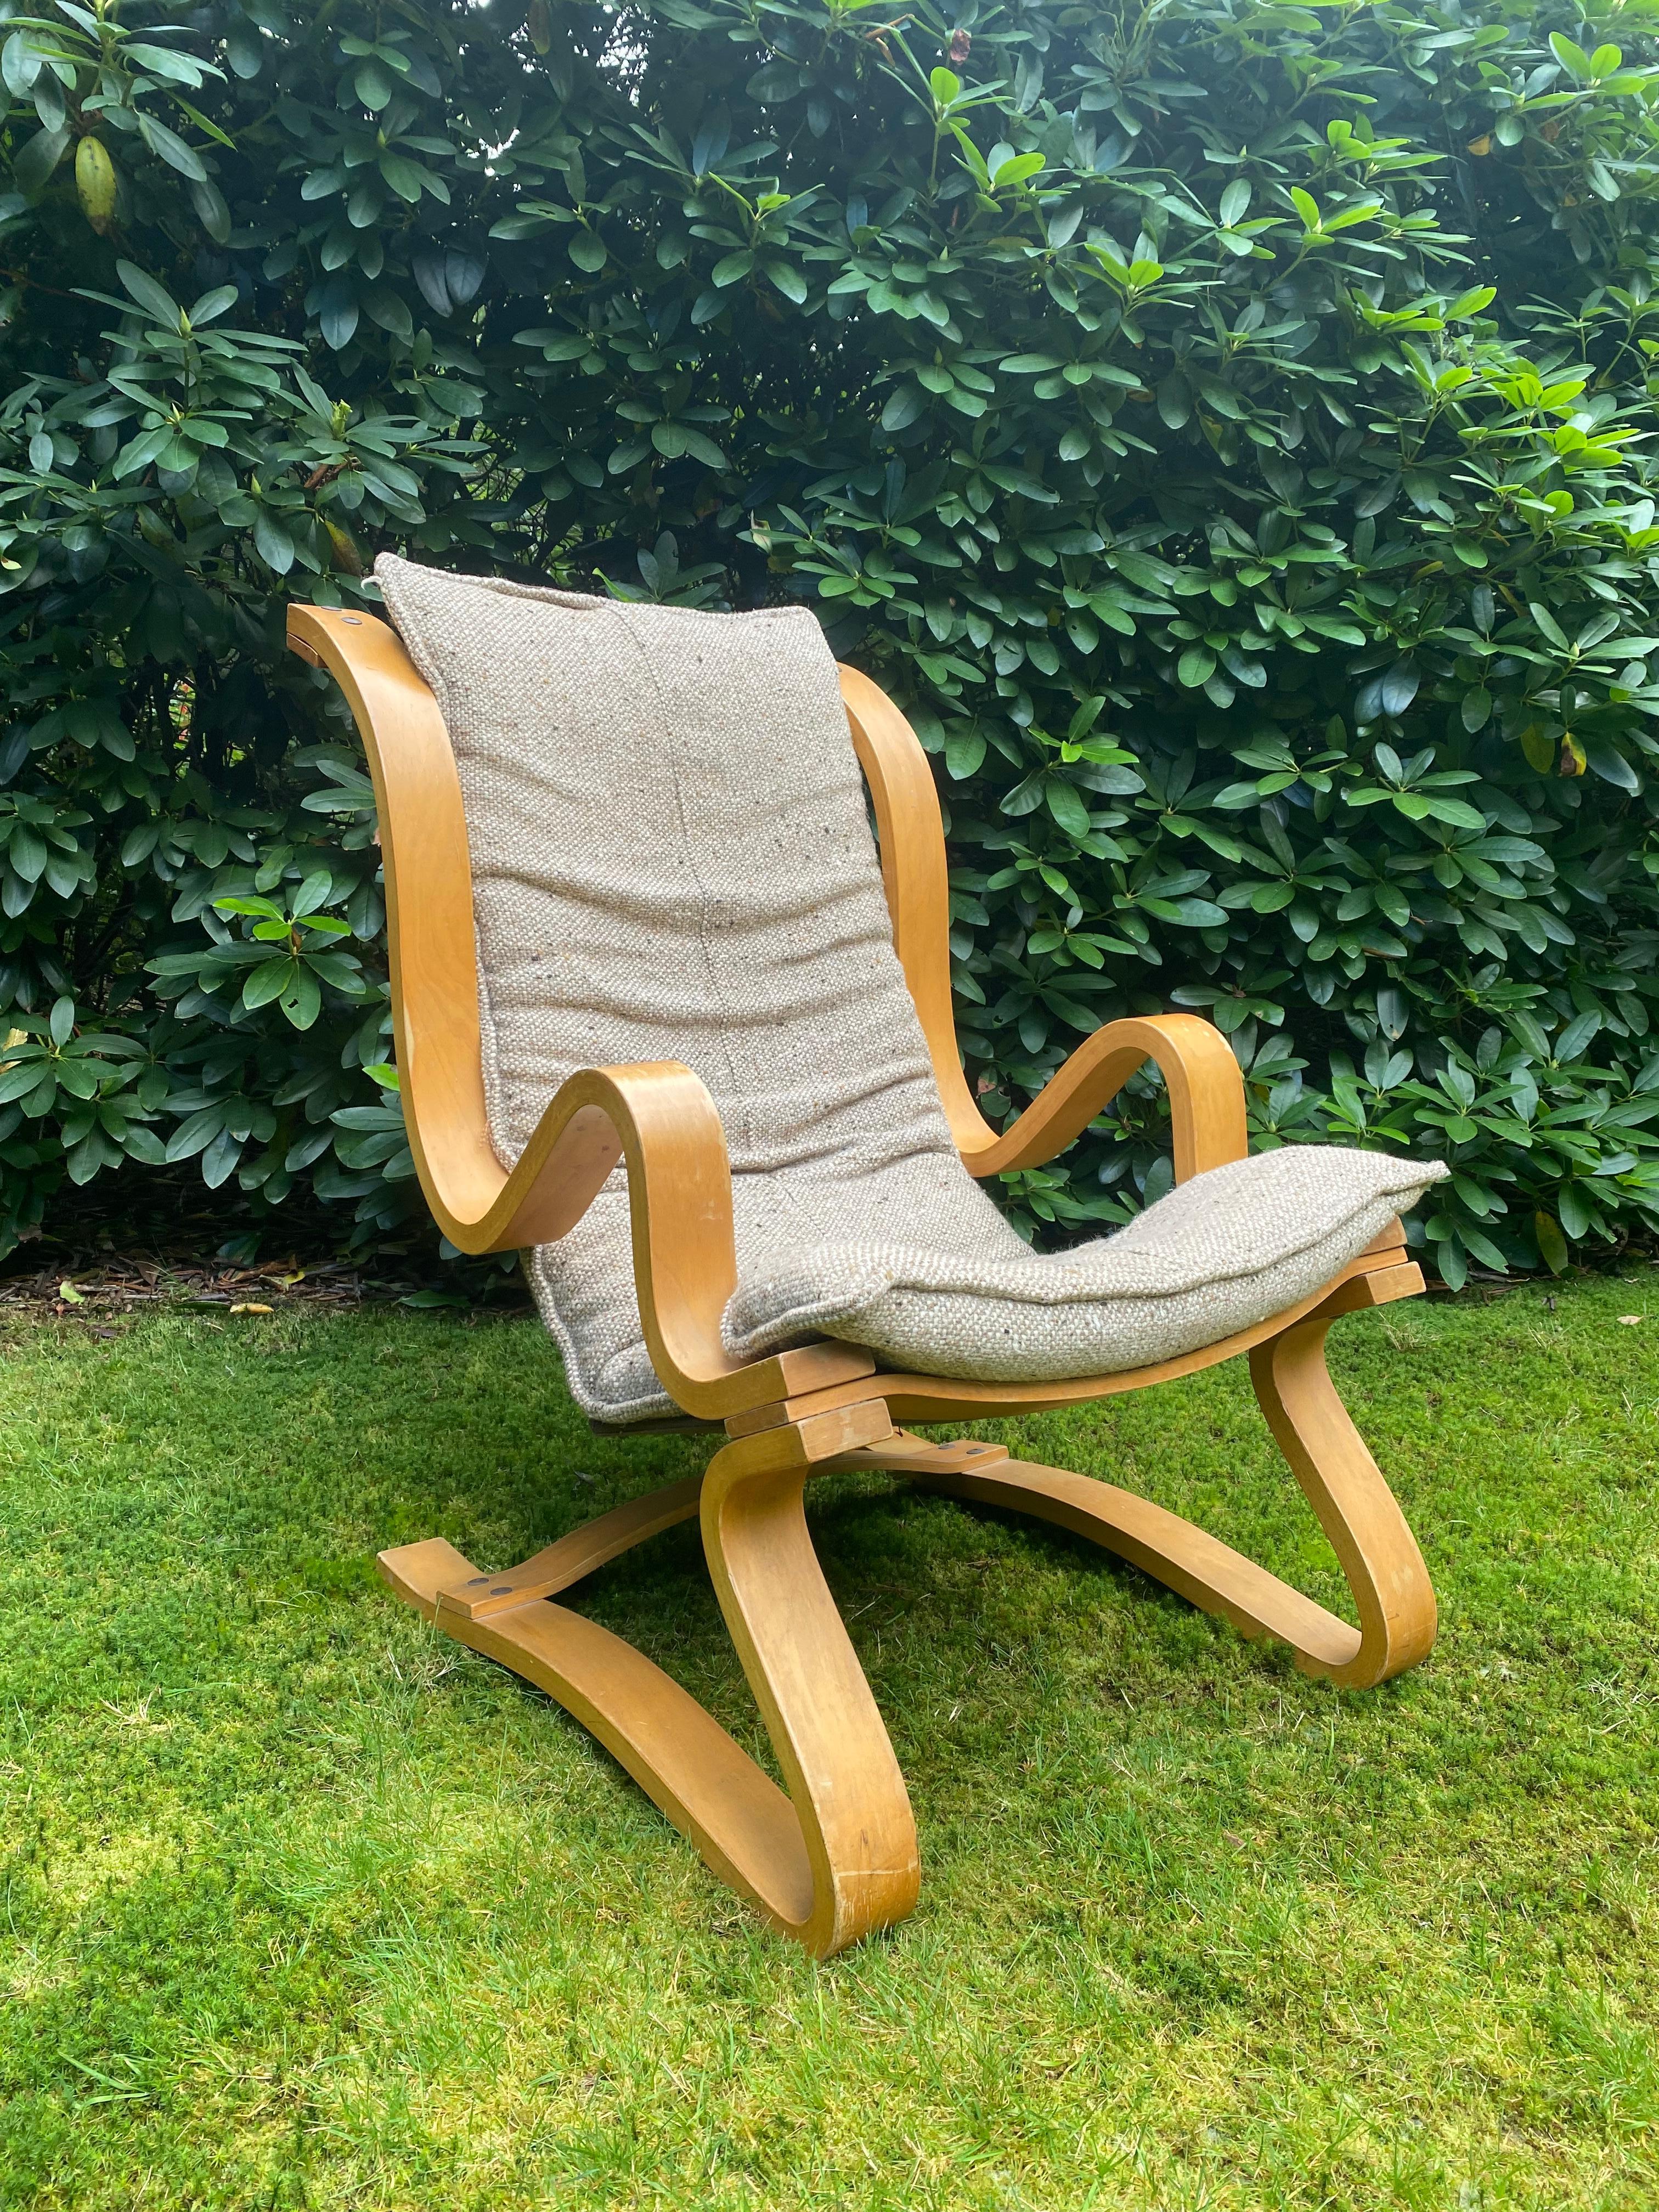 Absolute Magnificent Piece! Probably Scandinavian Design, Similar to Alvar Aalto and Marcel Breuer. The piece features a thick Beech Laminated frame with stunning Organic forms! With It’s (foam) cushion in a beautiful colored Wool on a Canvas base,